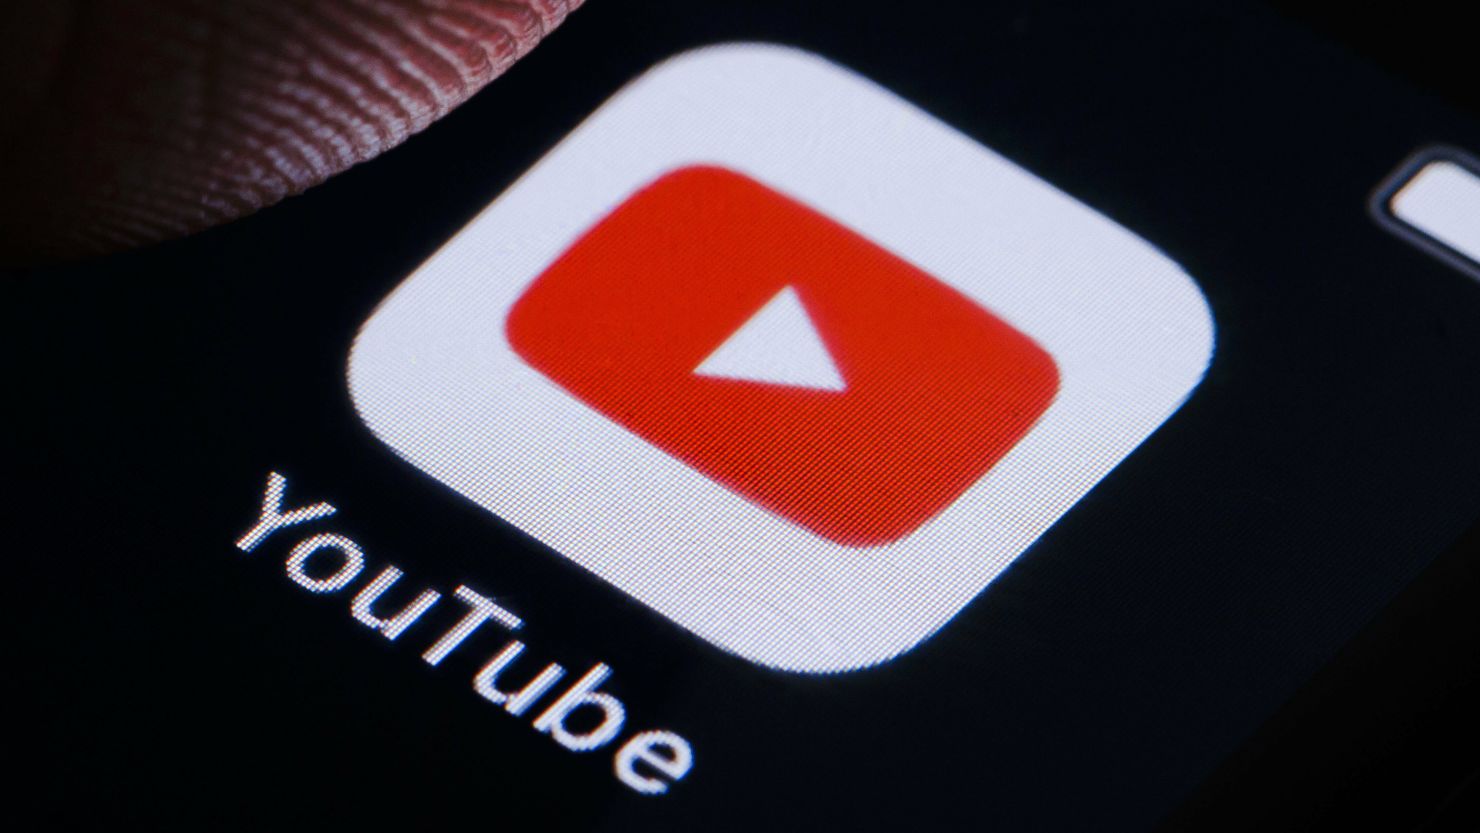 One year after starting to pay creators for making YouTube Shorts, the platform says 25% of its YouTube Partner Program creators are earning money through the shortform video format.